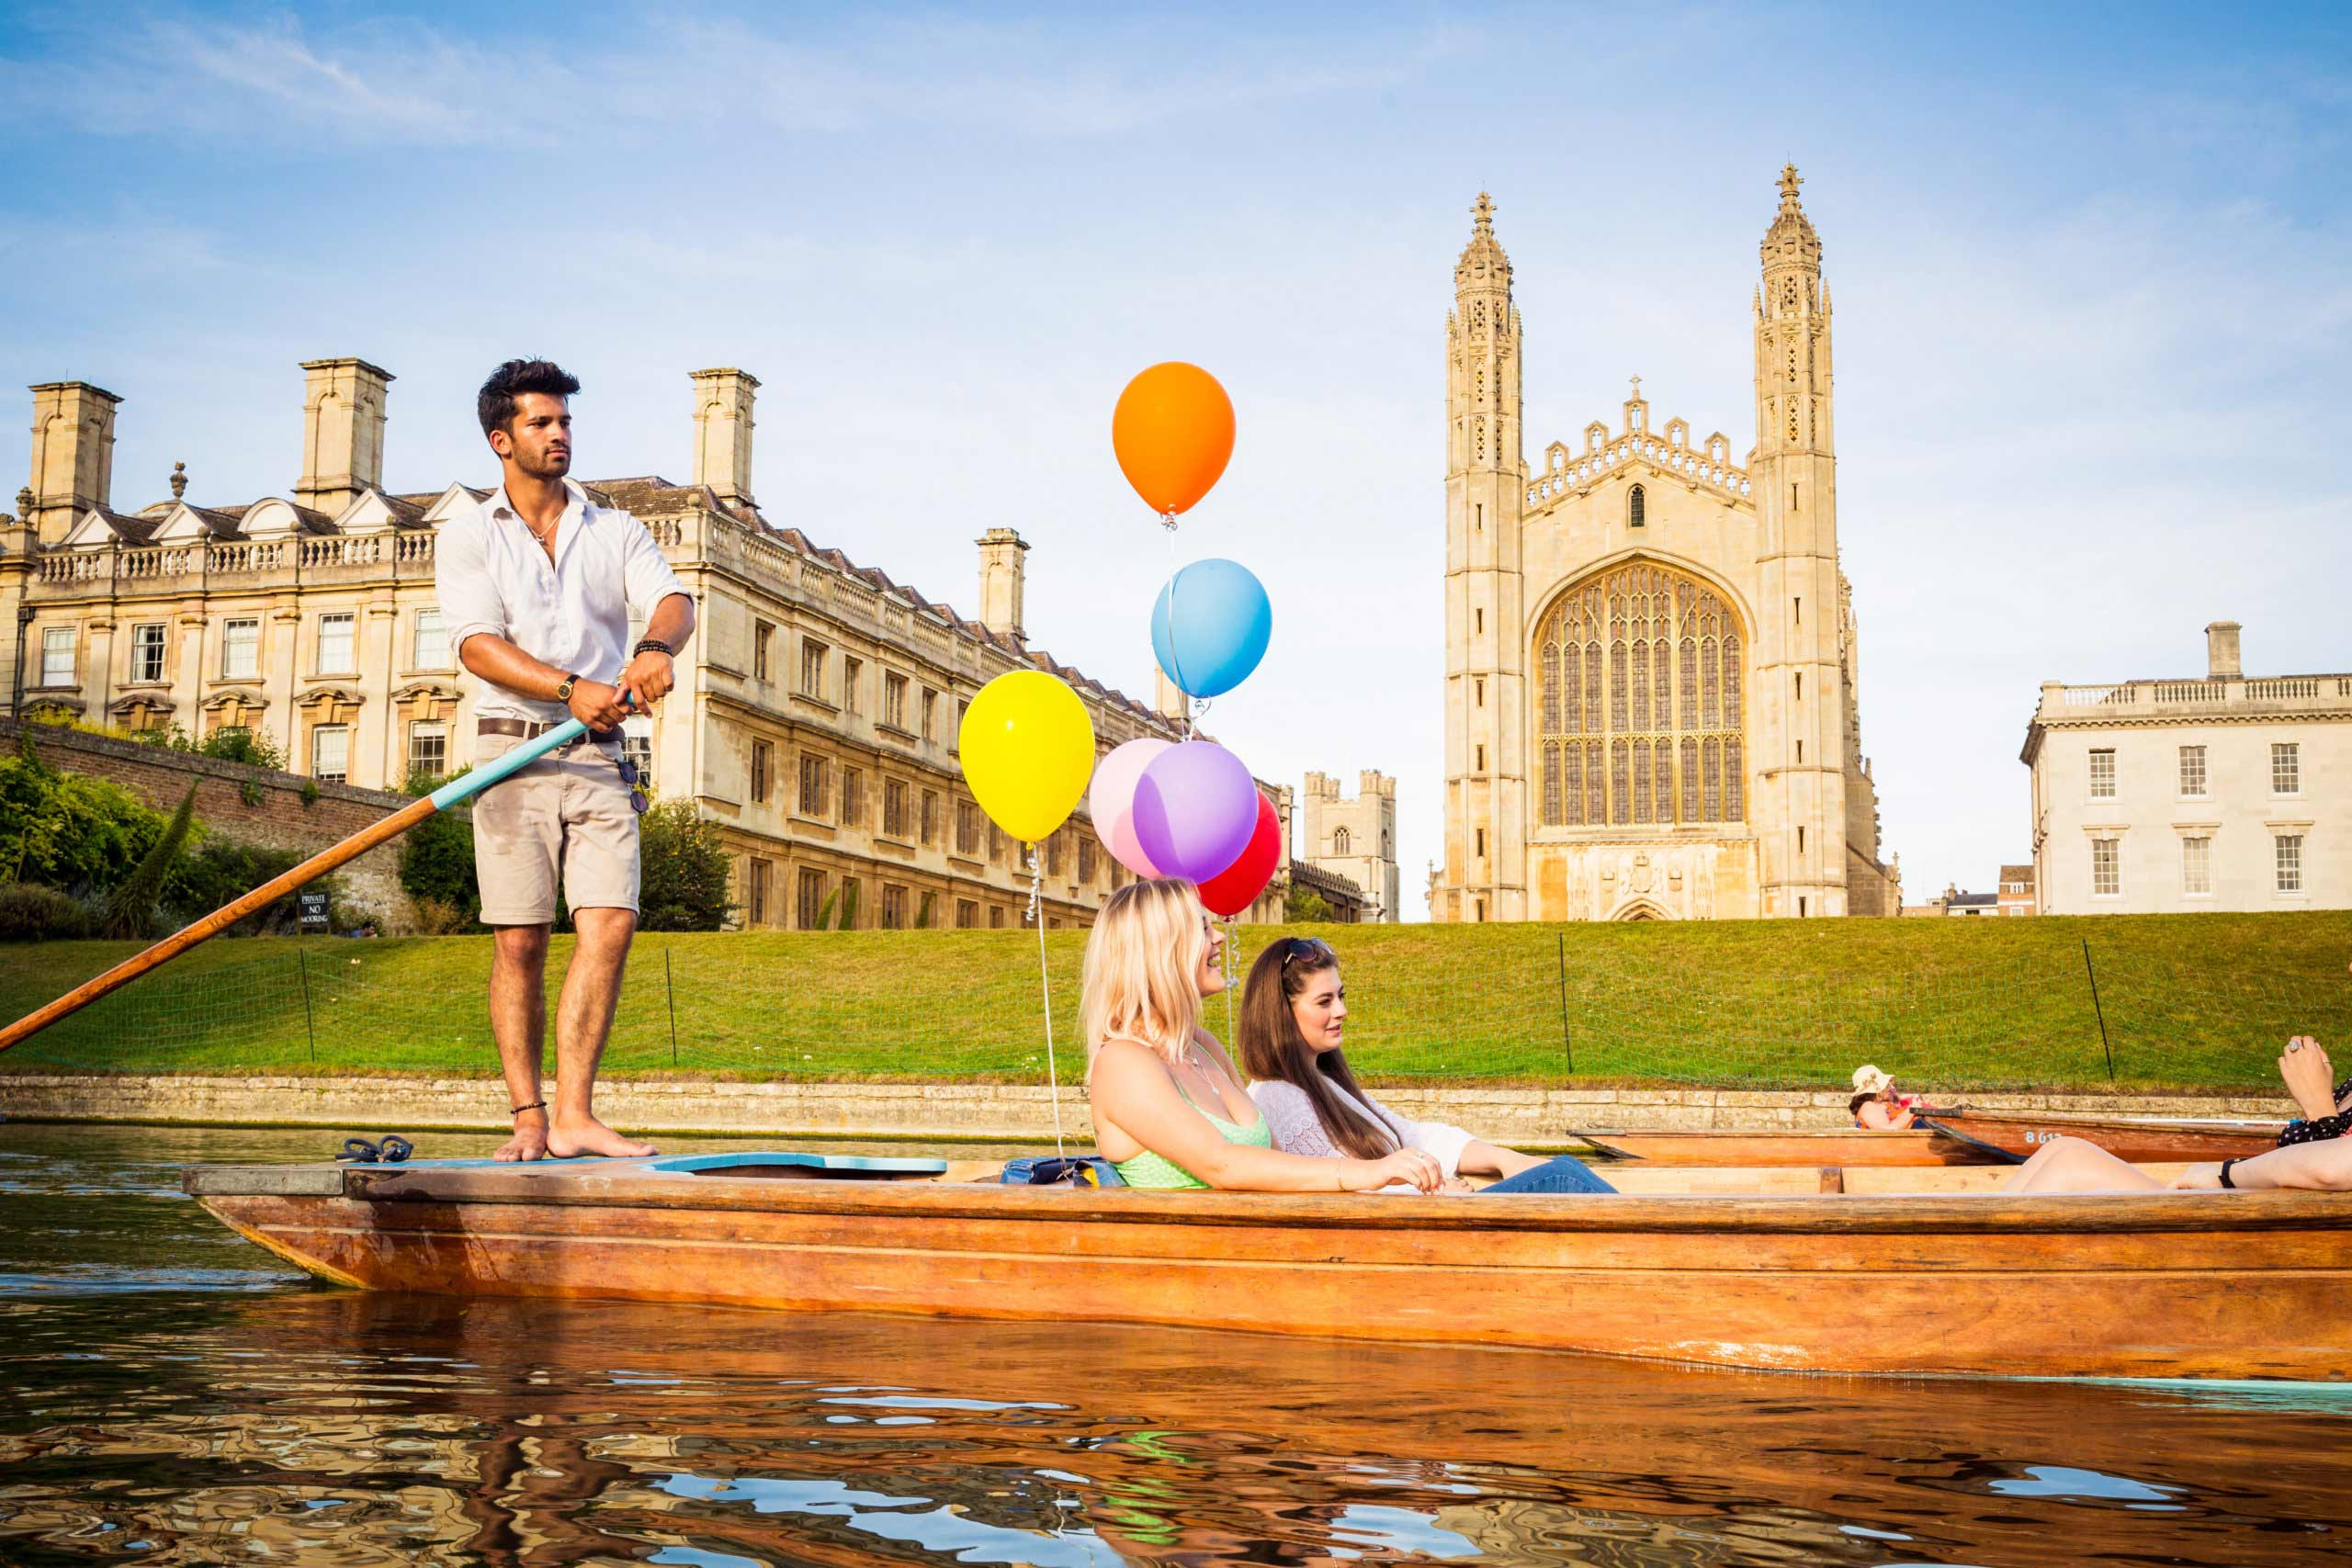 A birthday punting tour glides past King's College Chapel with a gorgeous chauffeur and 6 colourful balloons.